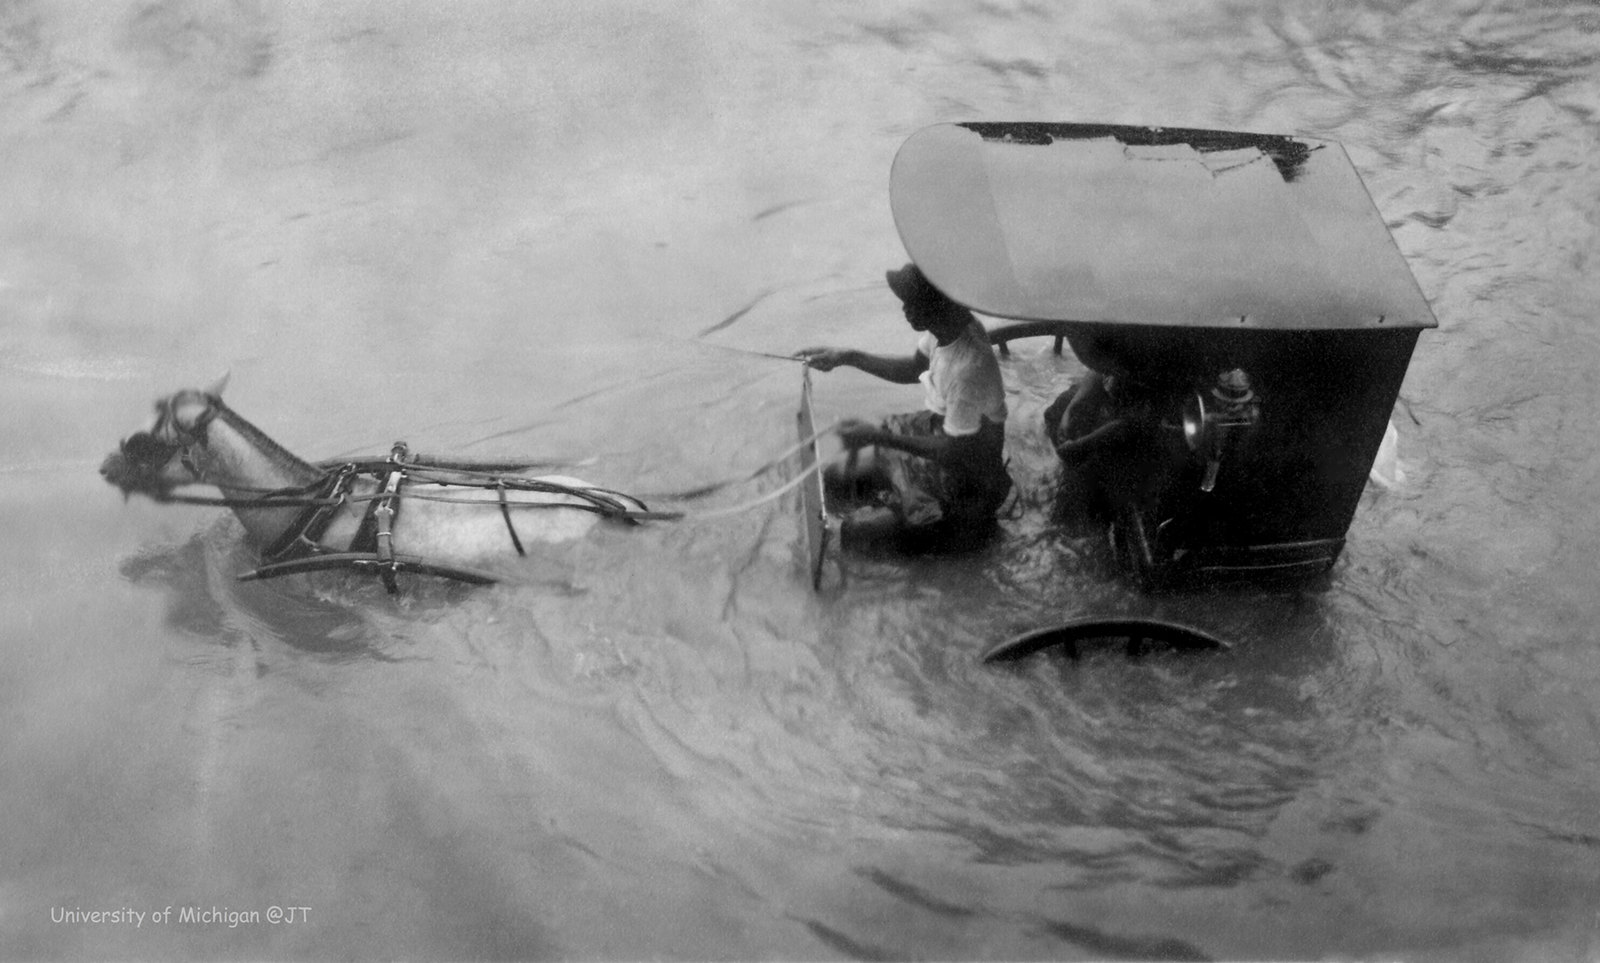 Carromata being driven in high water, Manila Philippines, 1910-1915